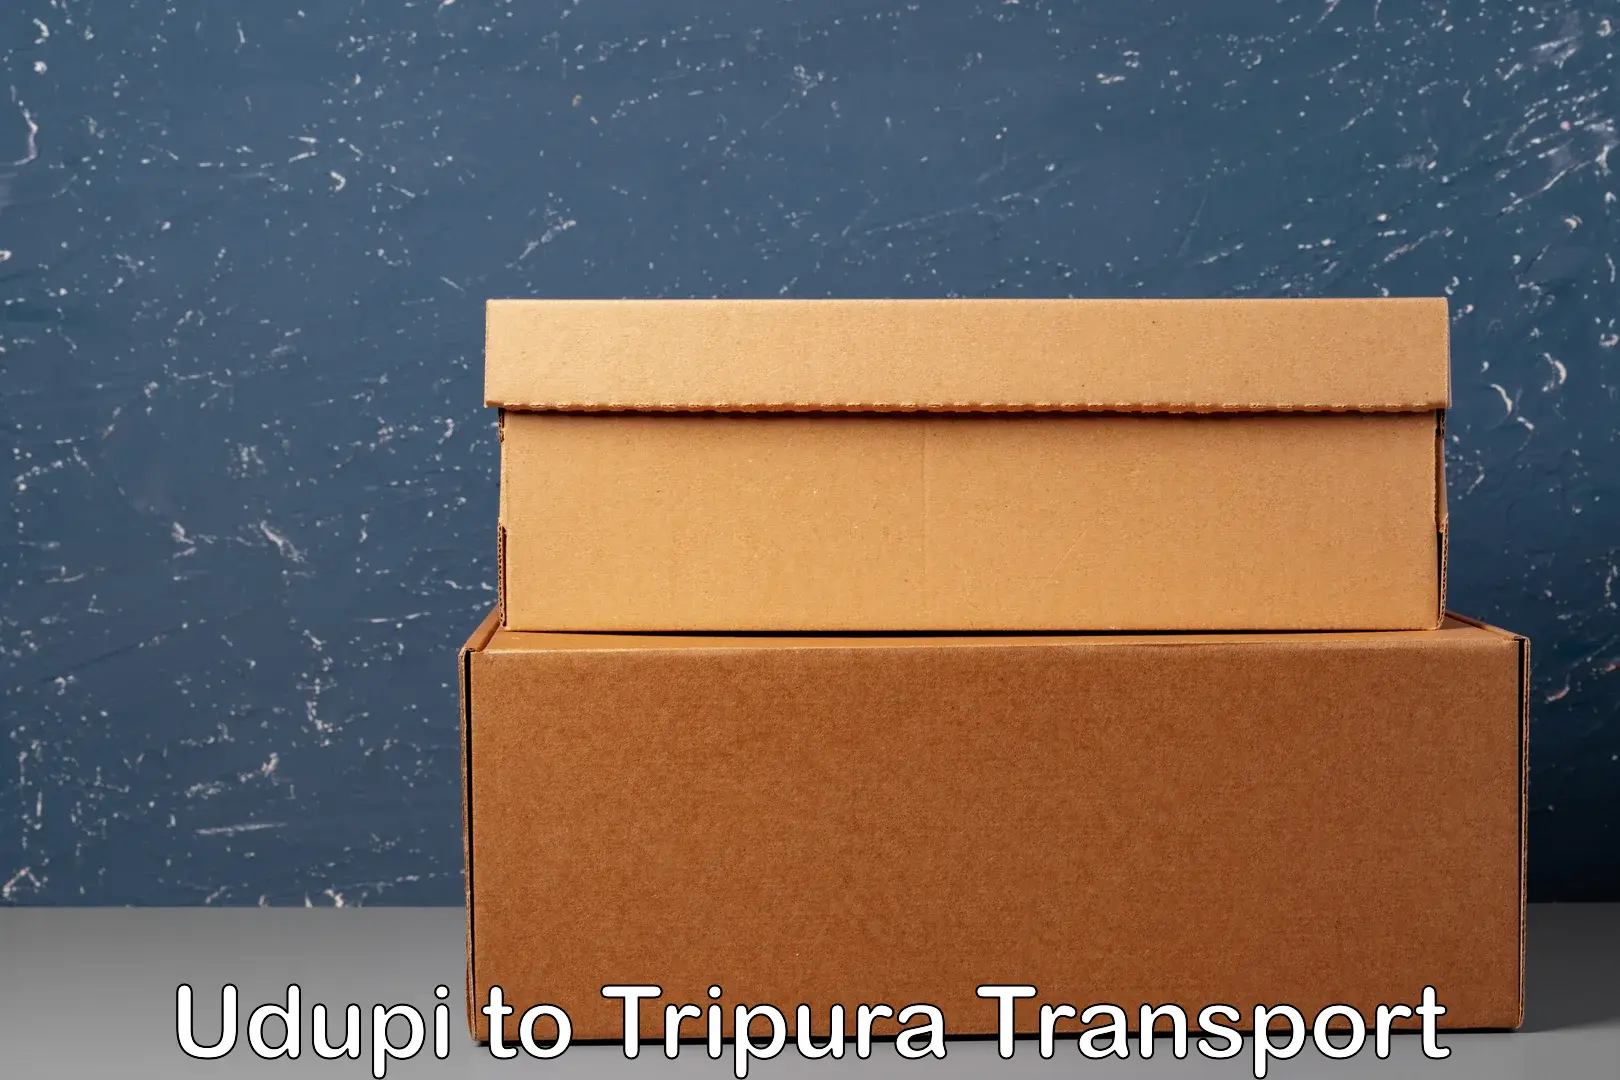 Container transport service in Udupi to Tripura